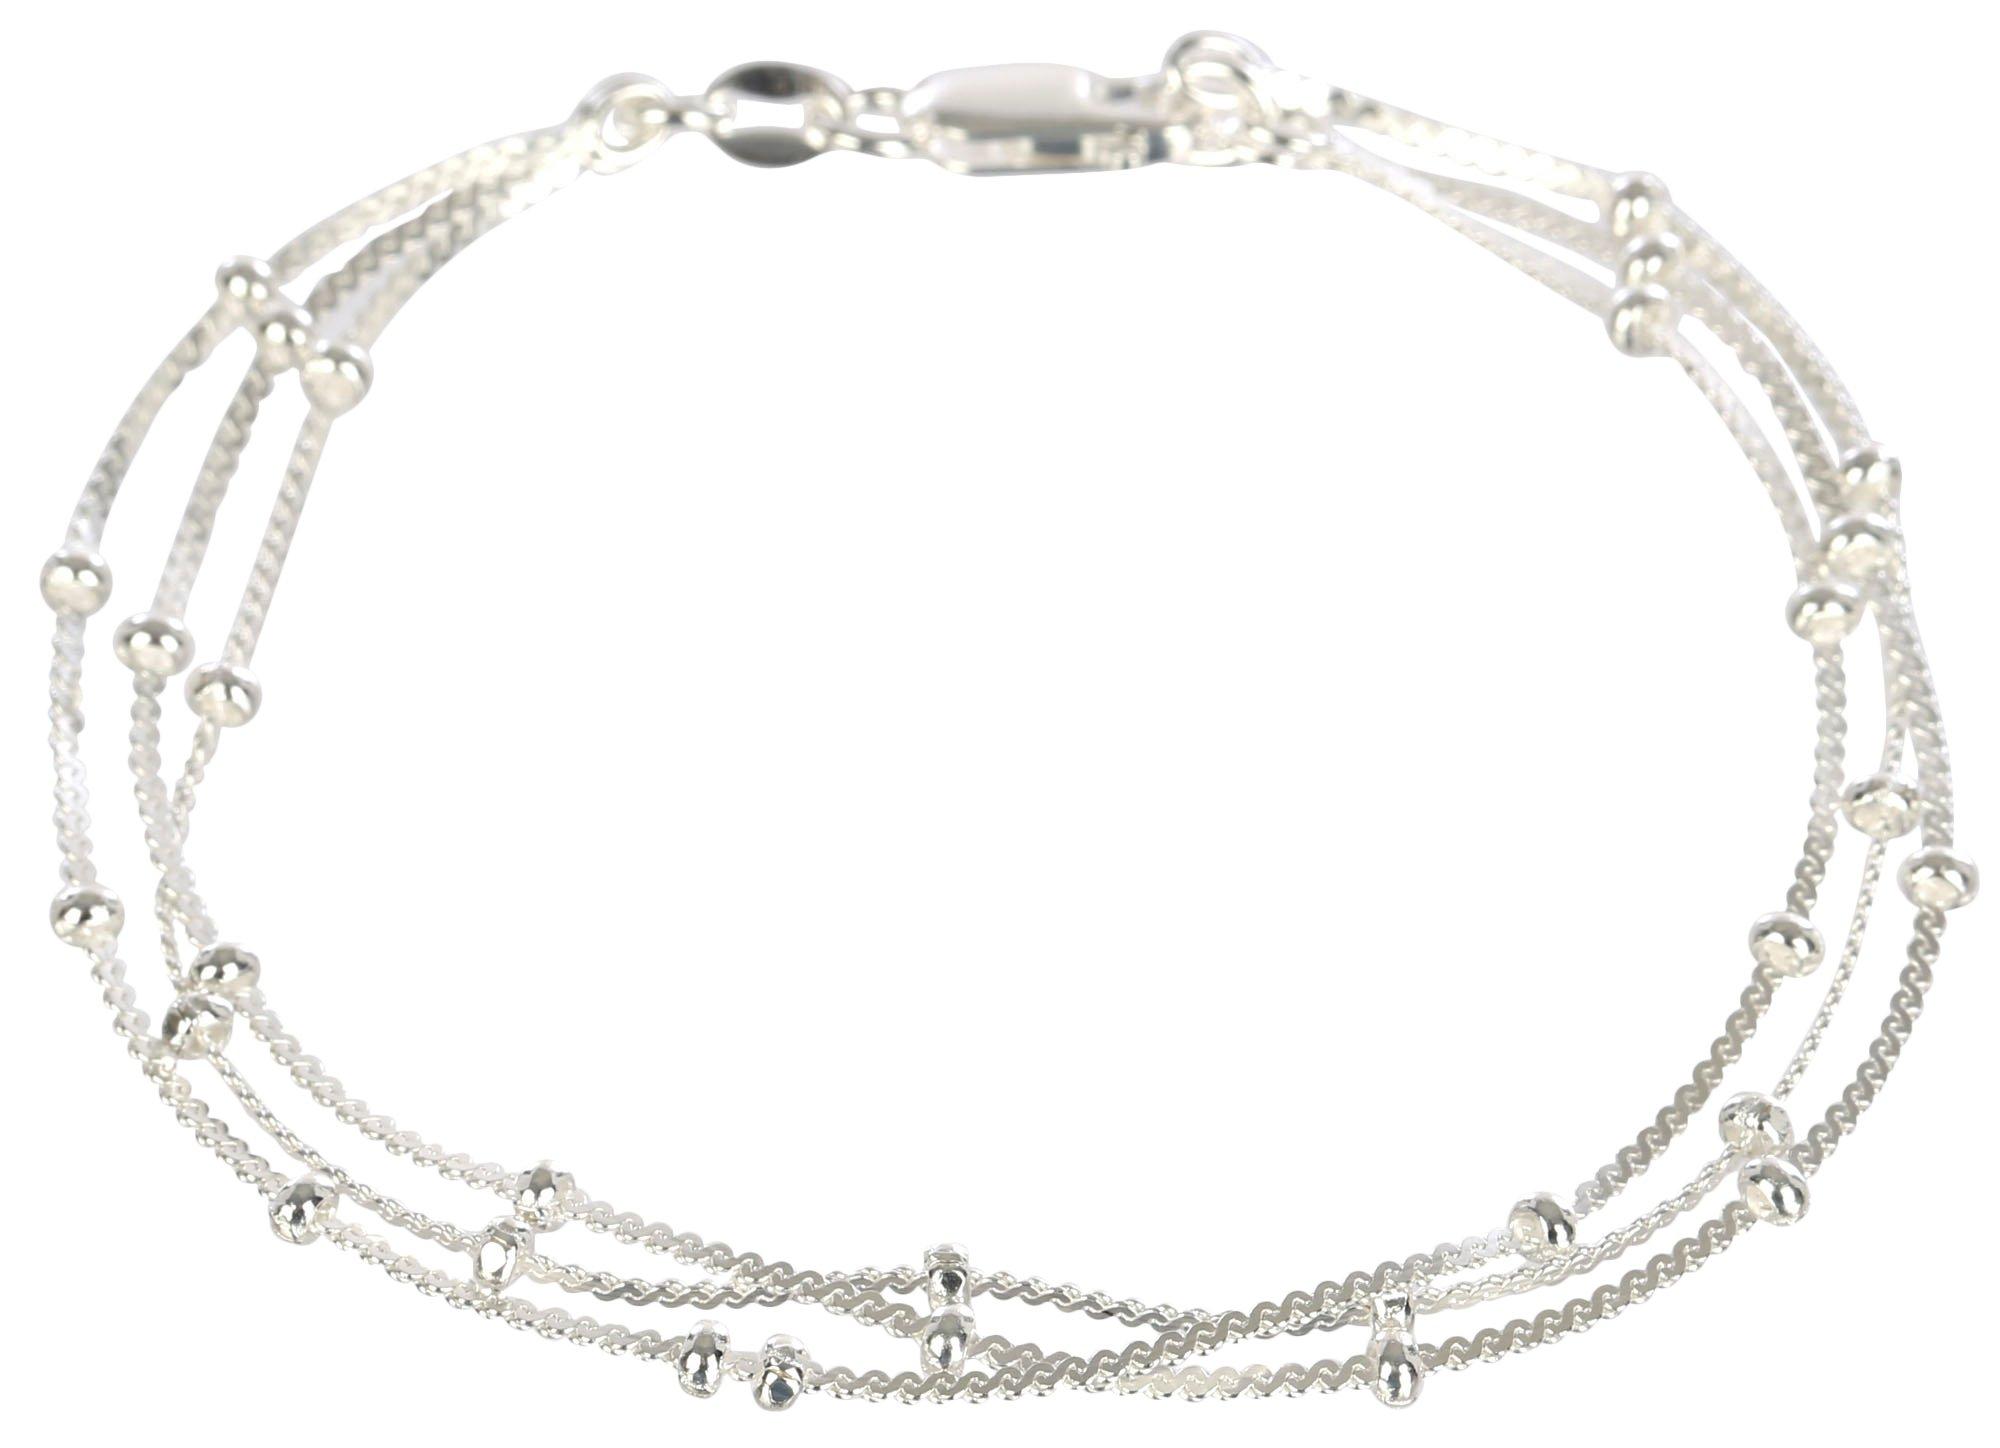 Piper & Taylor 3-Row Chain Bracelet